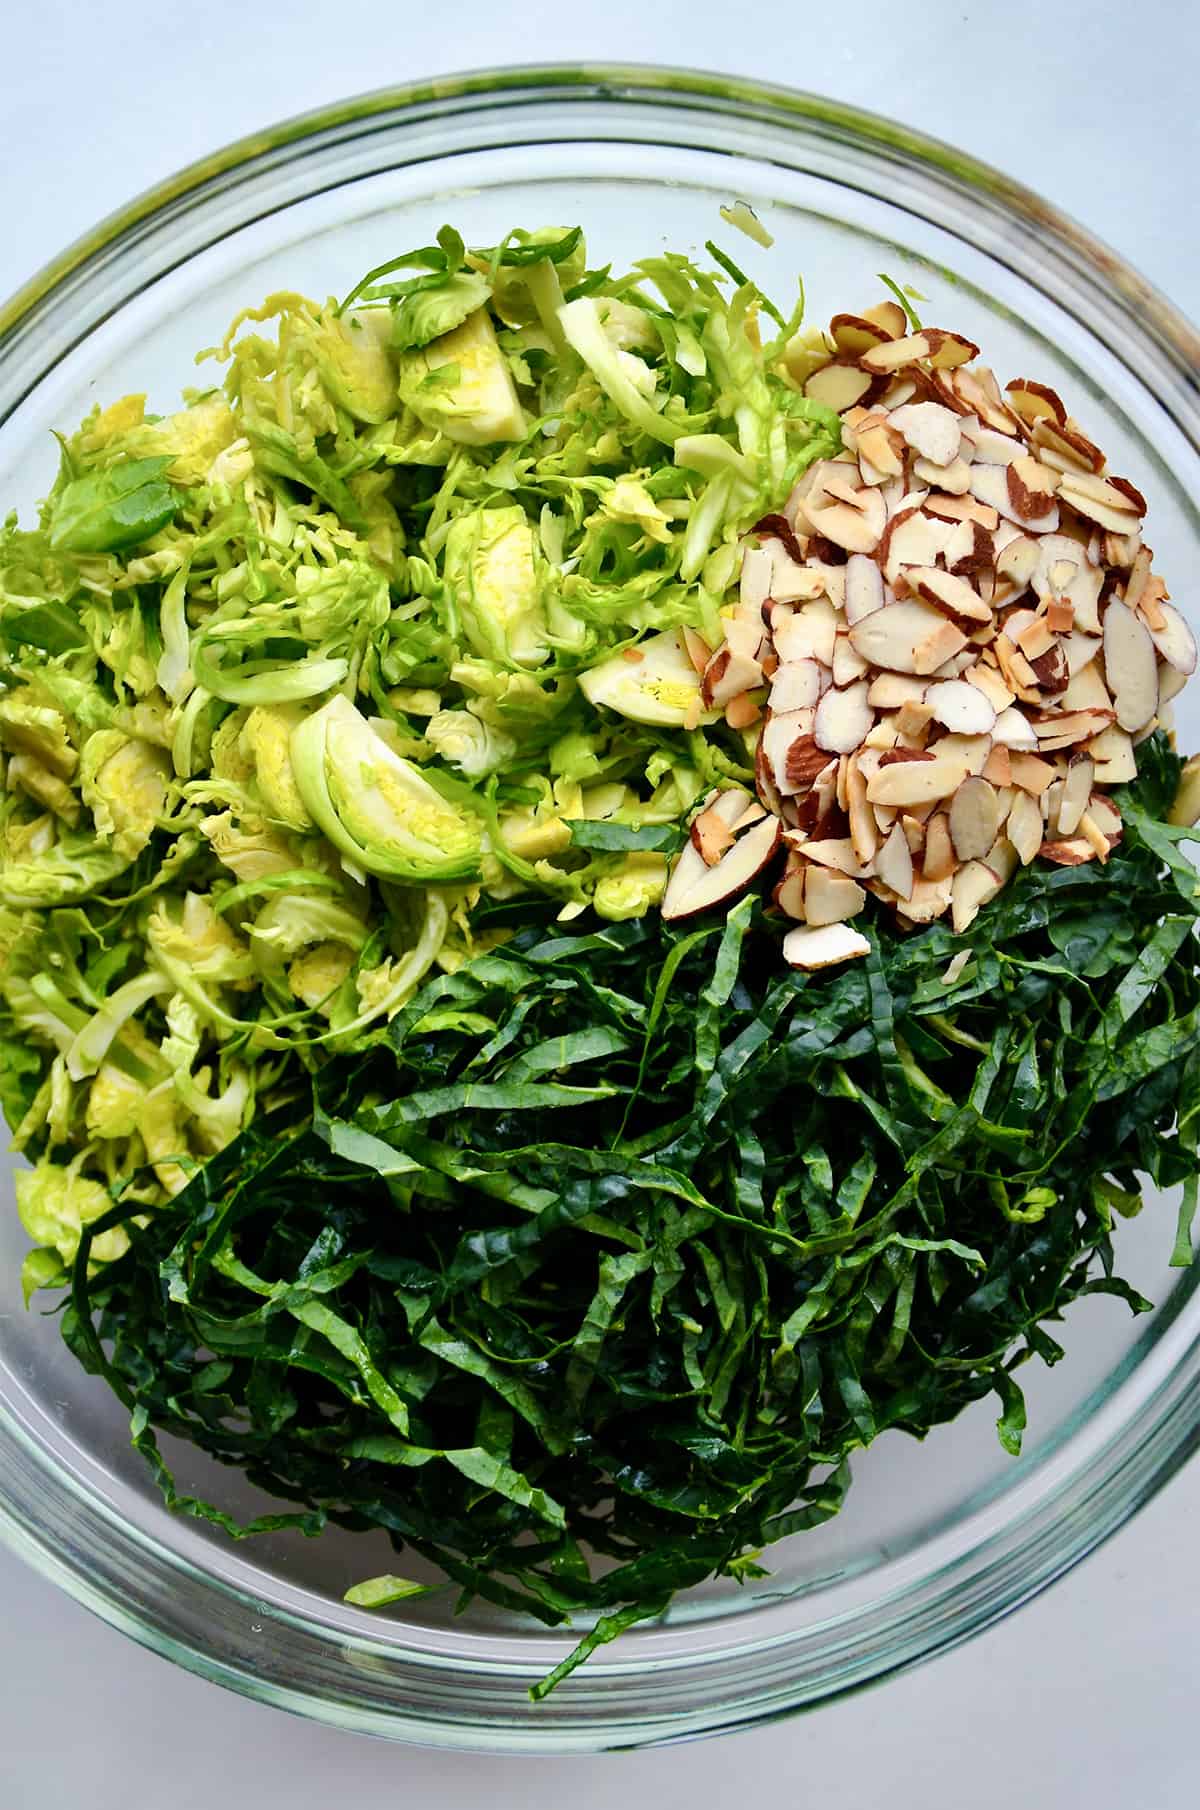 Shredded kale and Brussels sprouts and sliced almonds in a large glass mixing bowl.